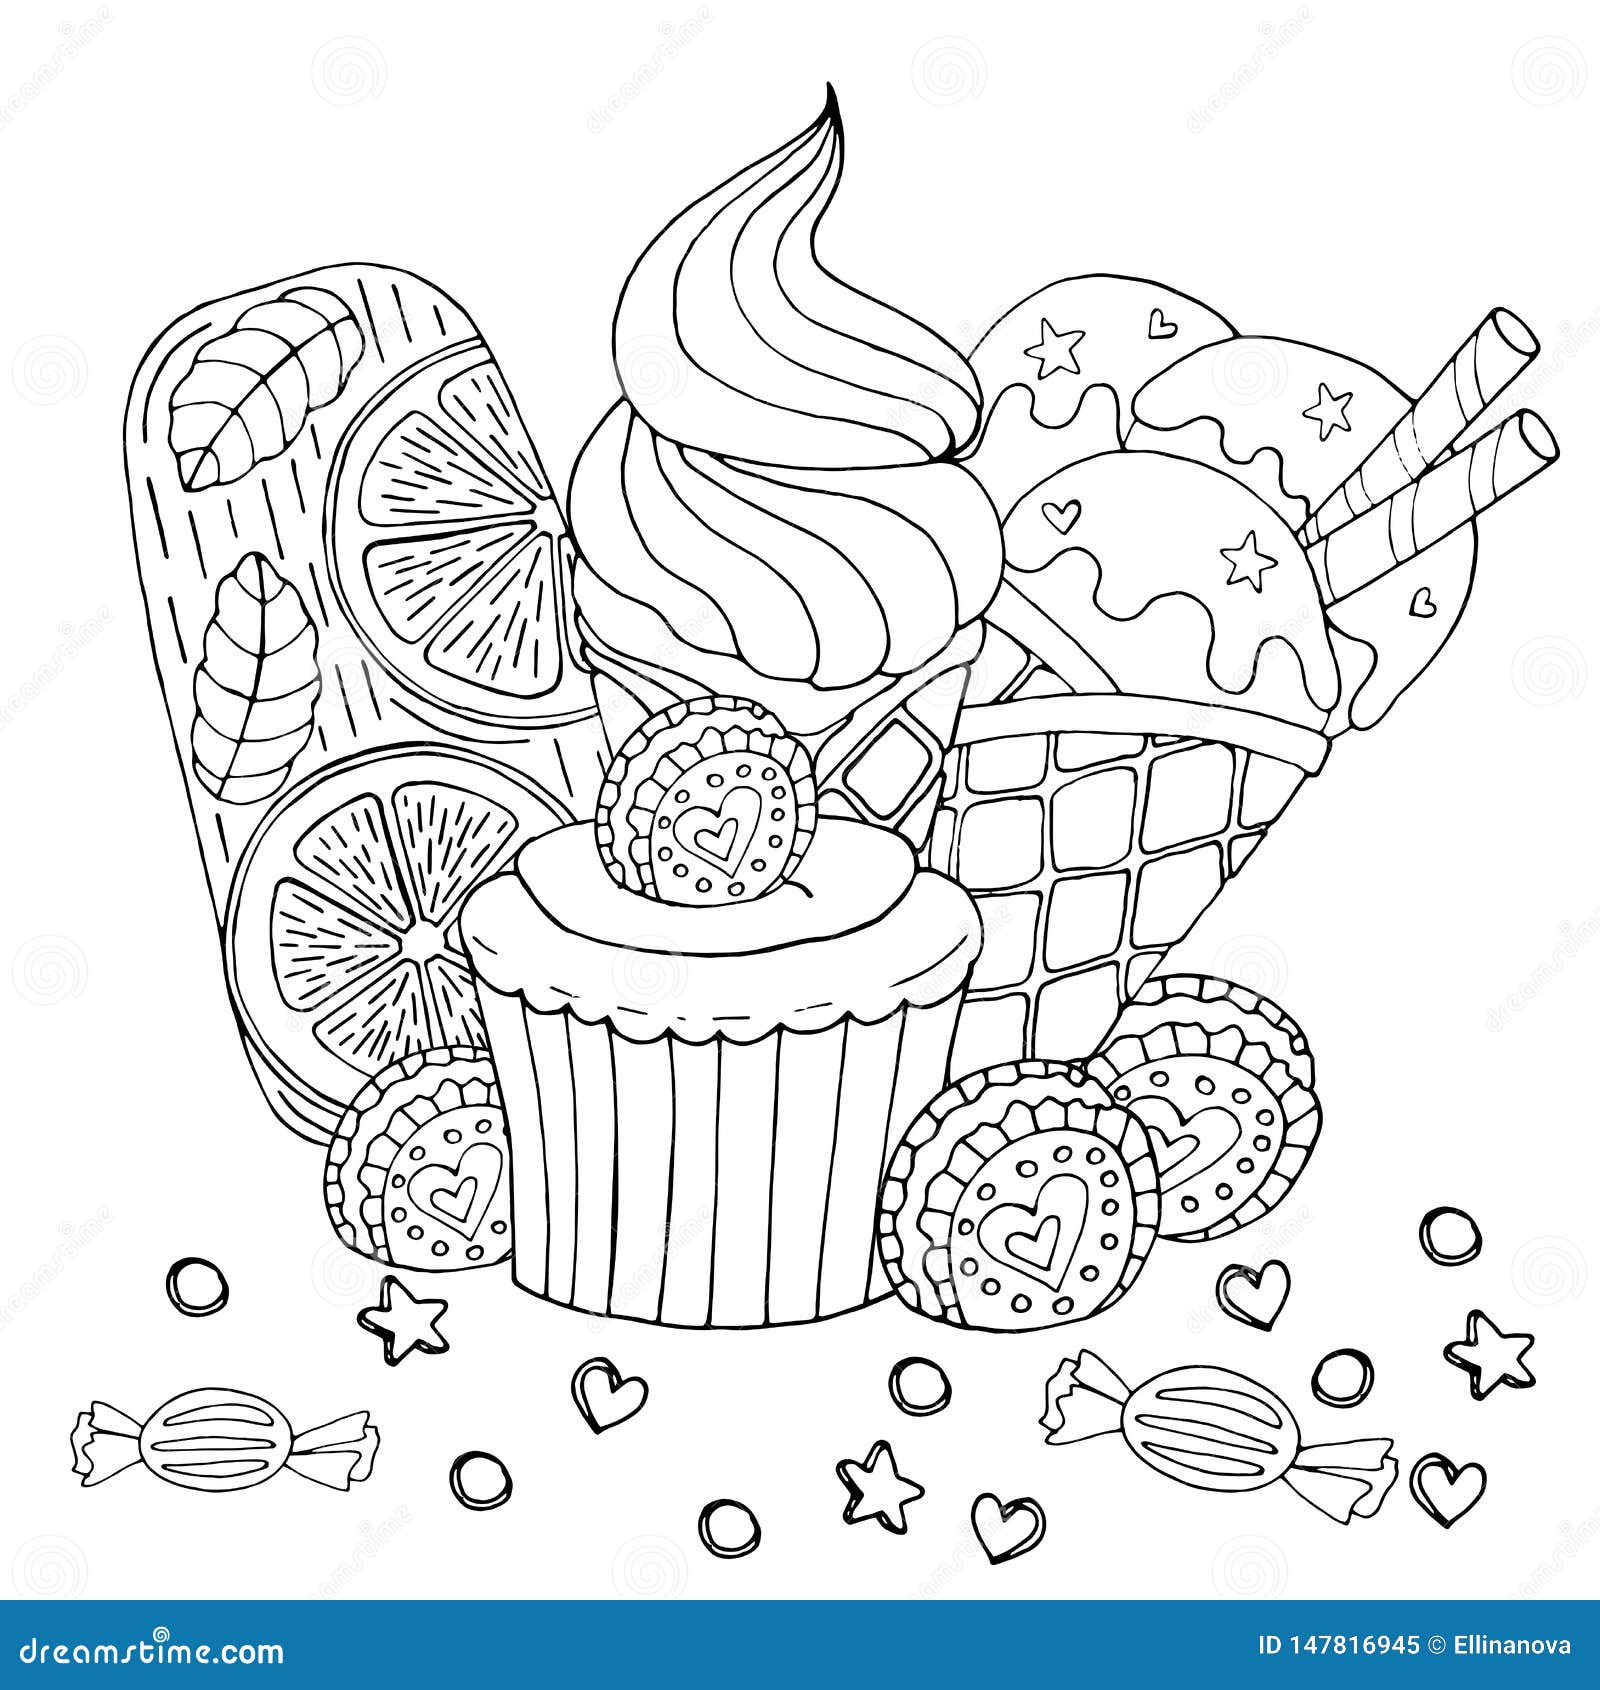 Coloring Page with Cake, Cupcake, Candy, Ice Cream and Other Dessert ...